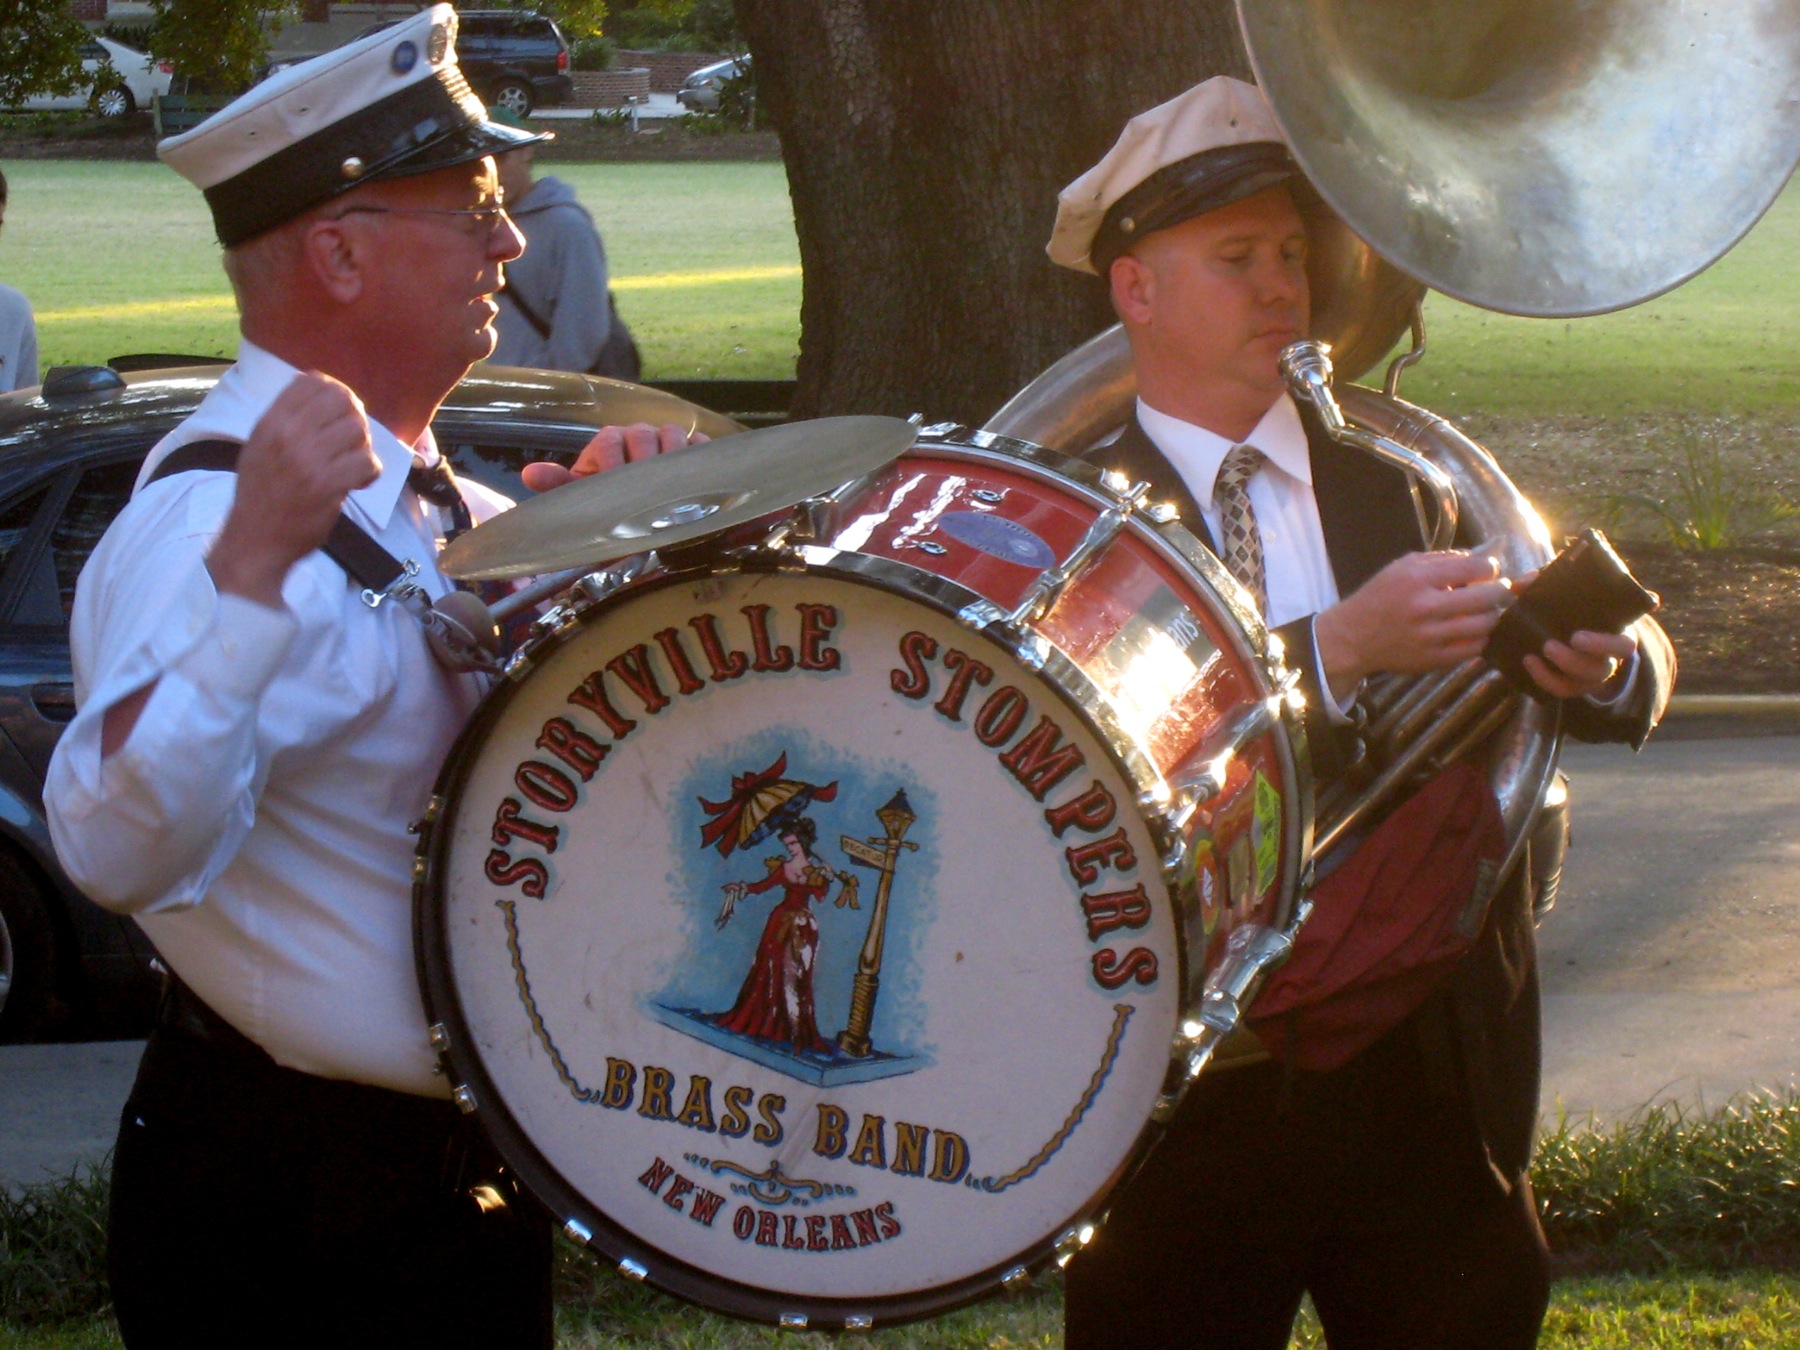 two men playing a large steel drum during a parade